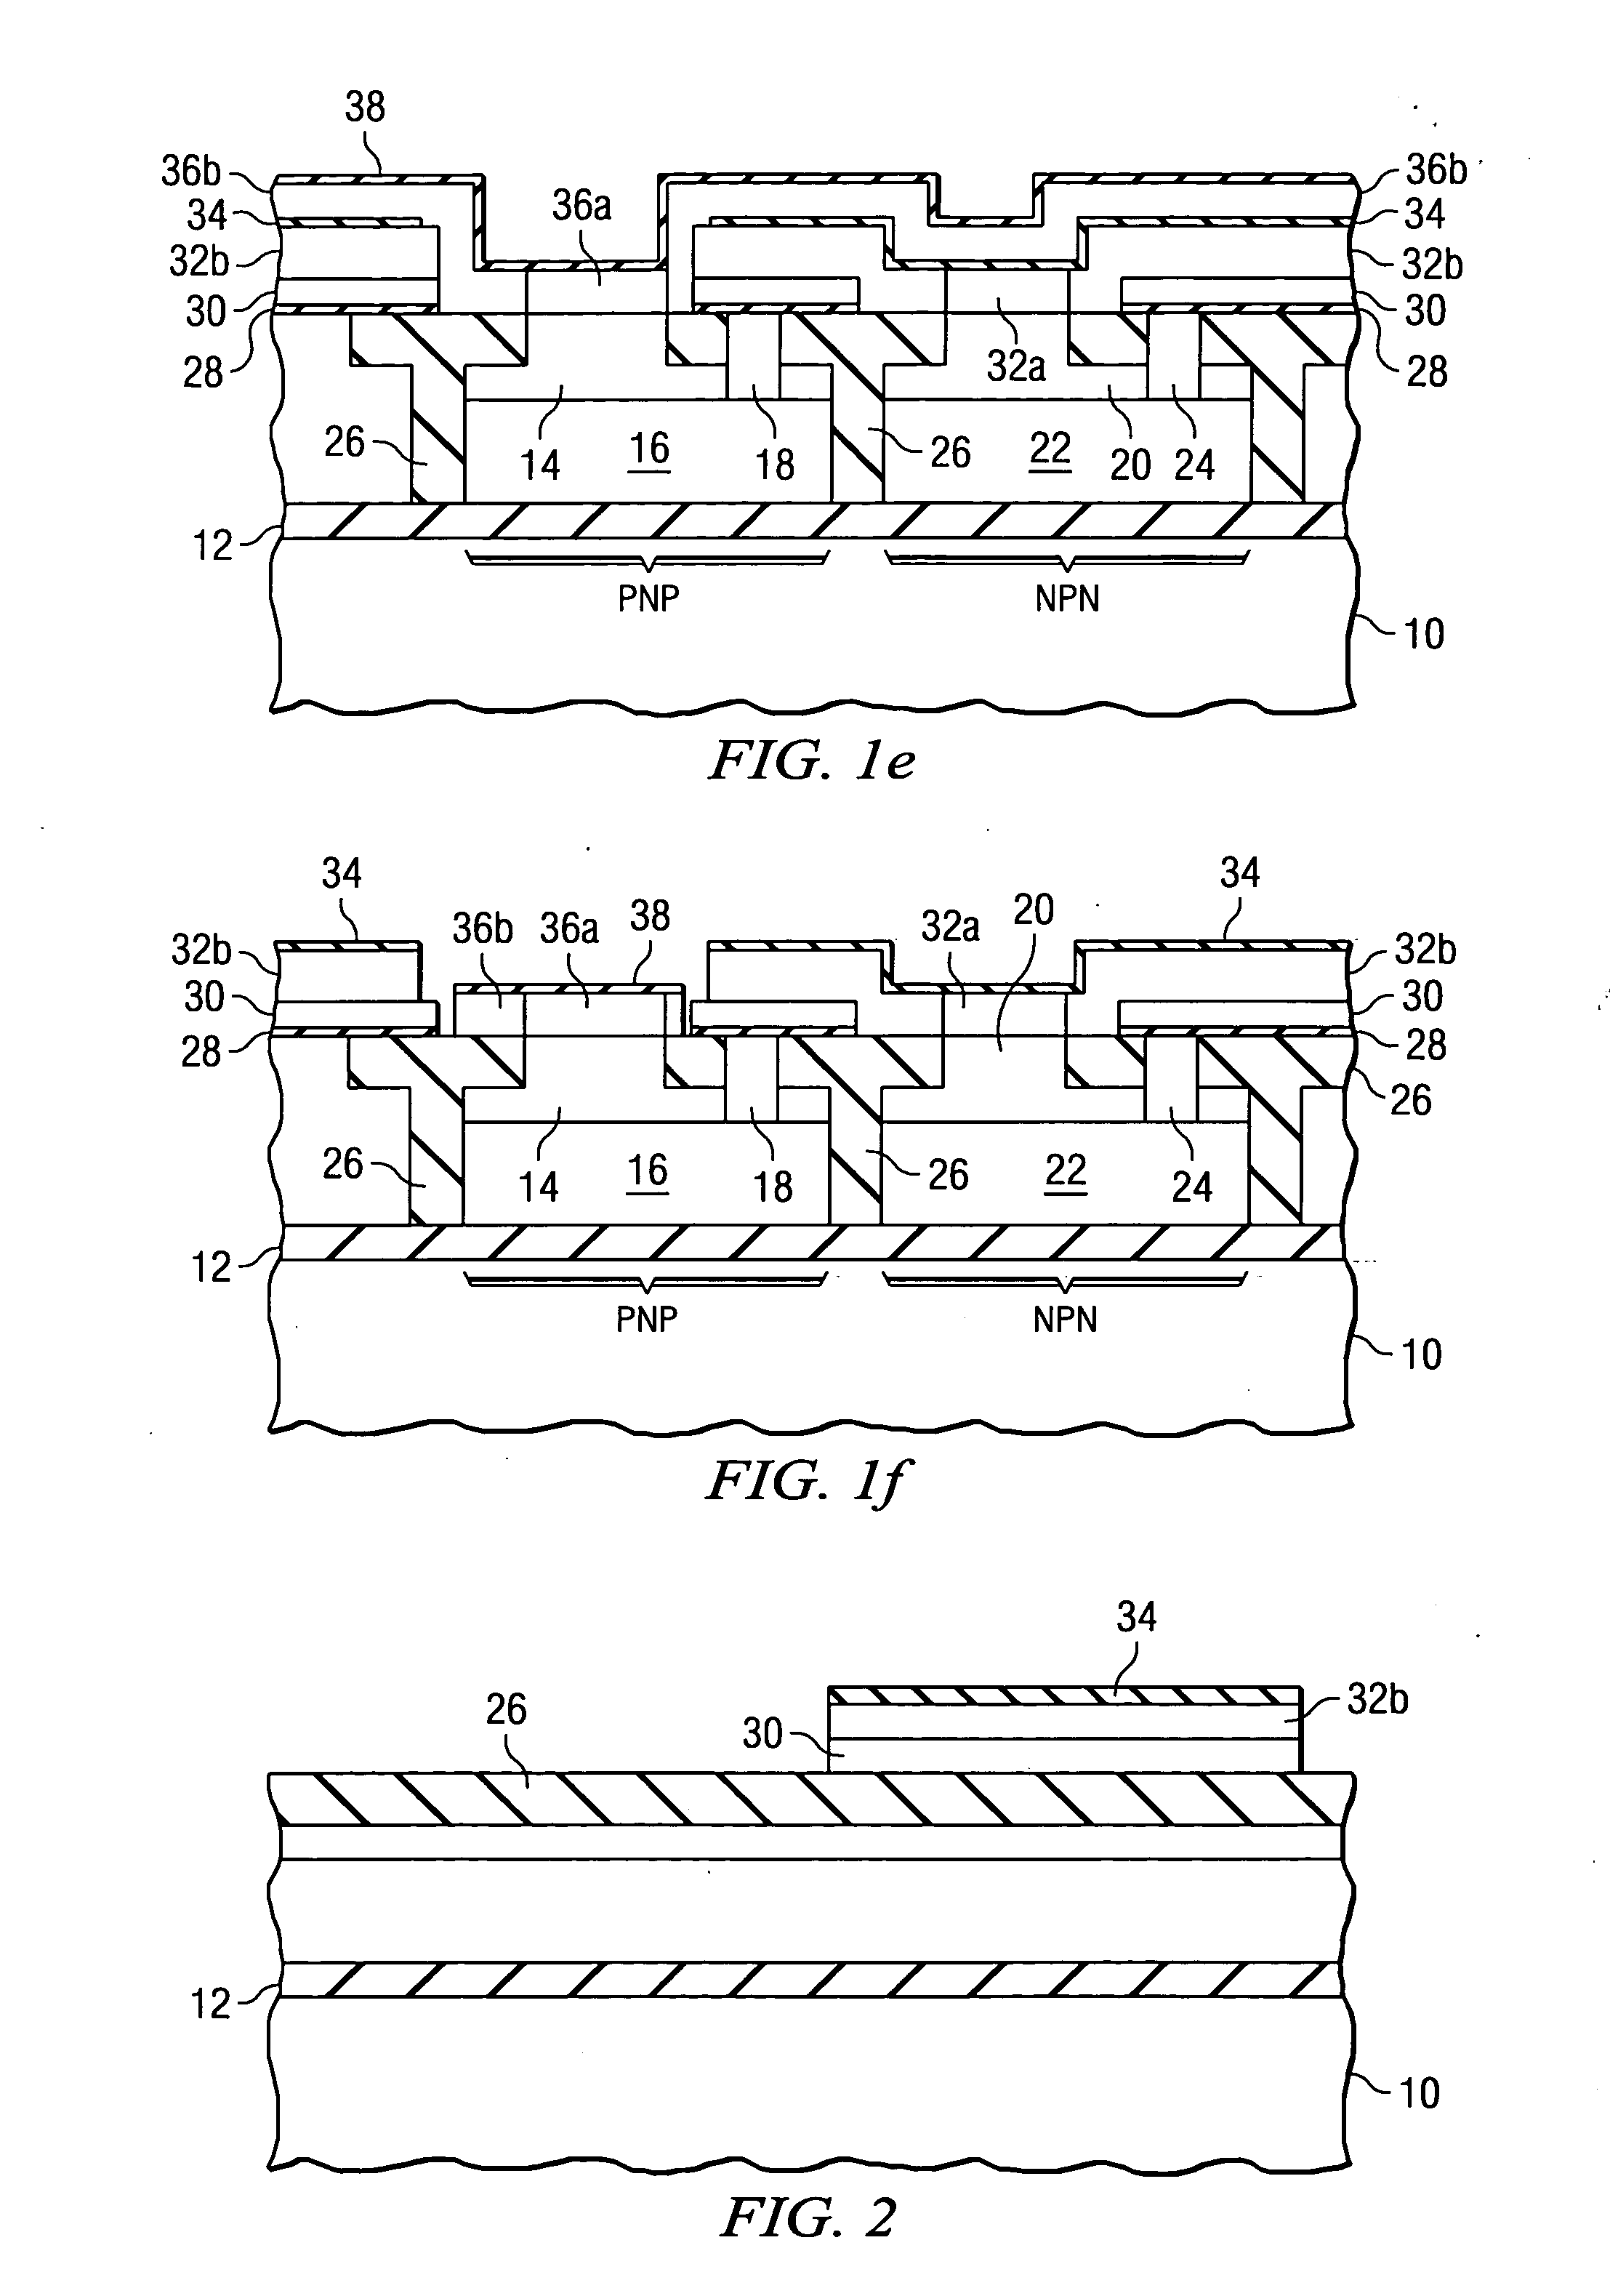 Method of fabricating complementary bipolar transistors with SiGe base regions